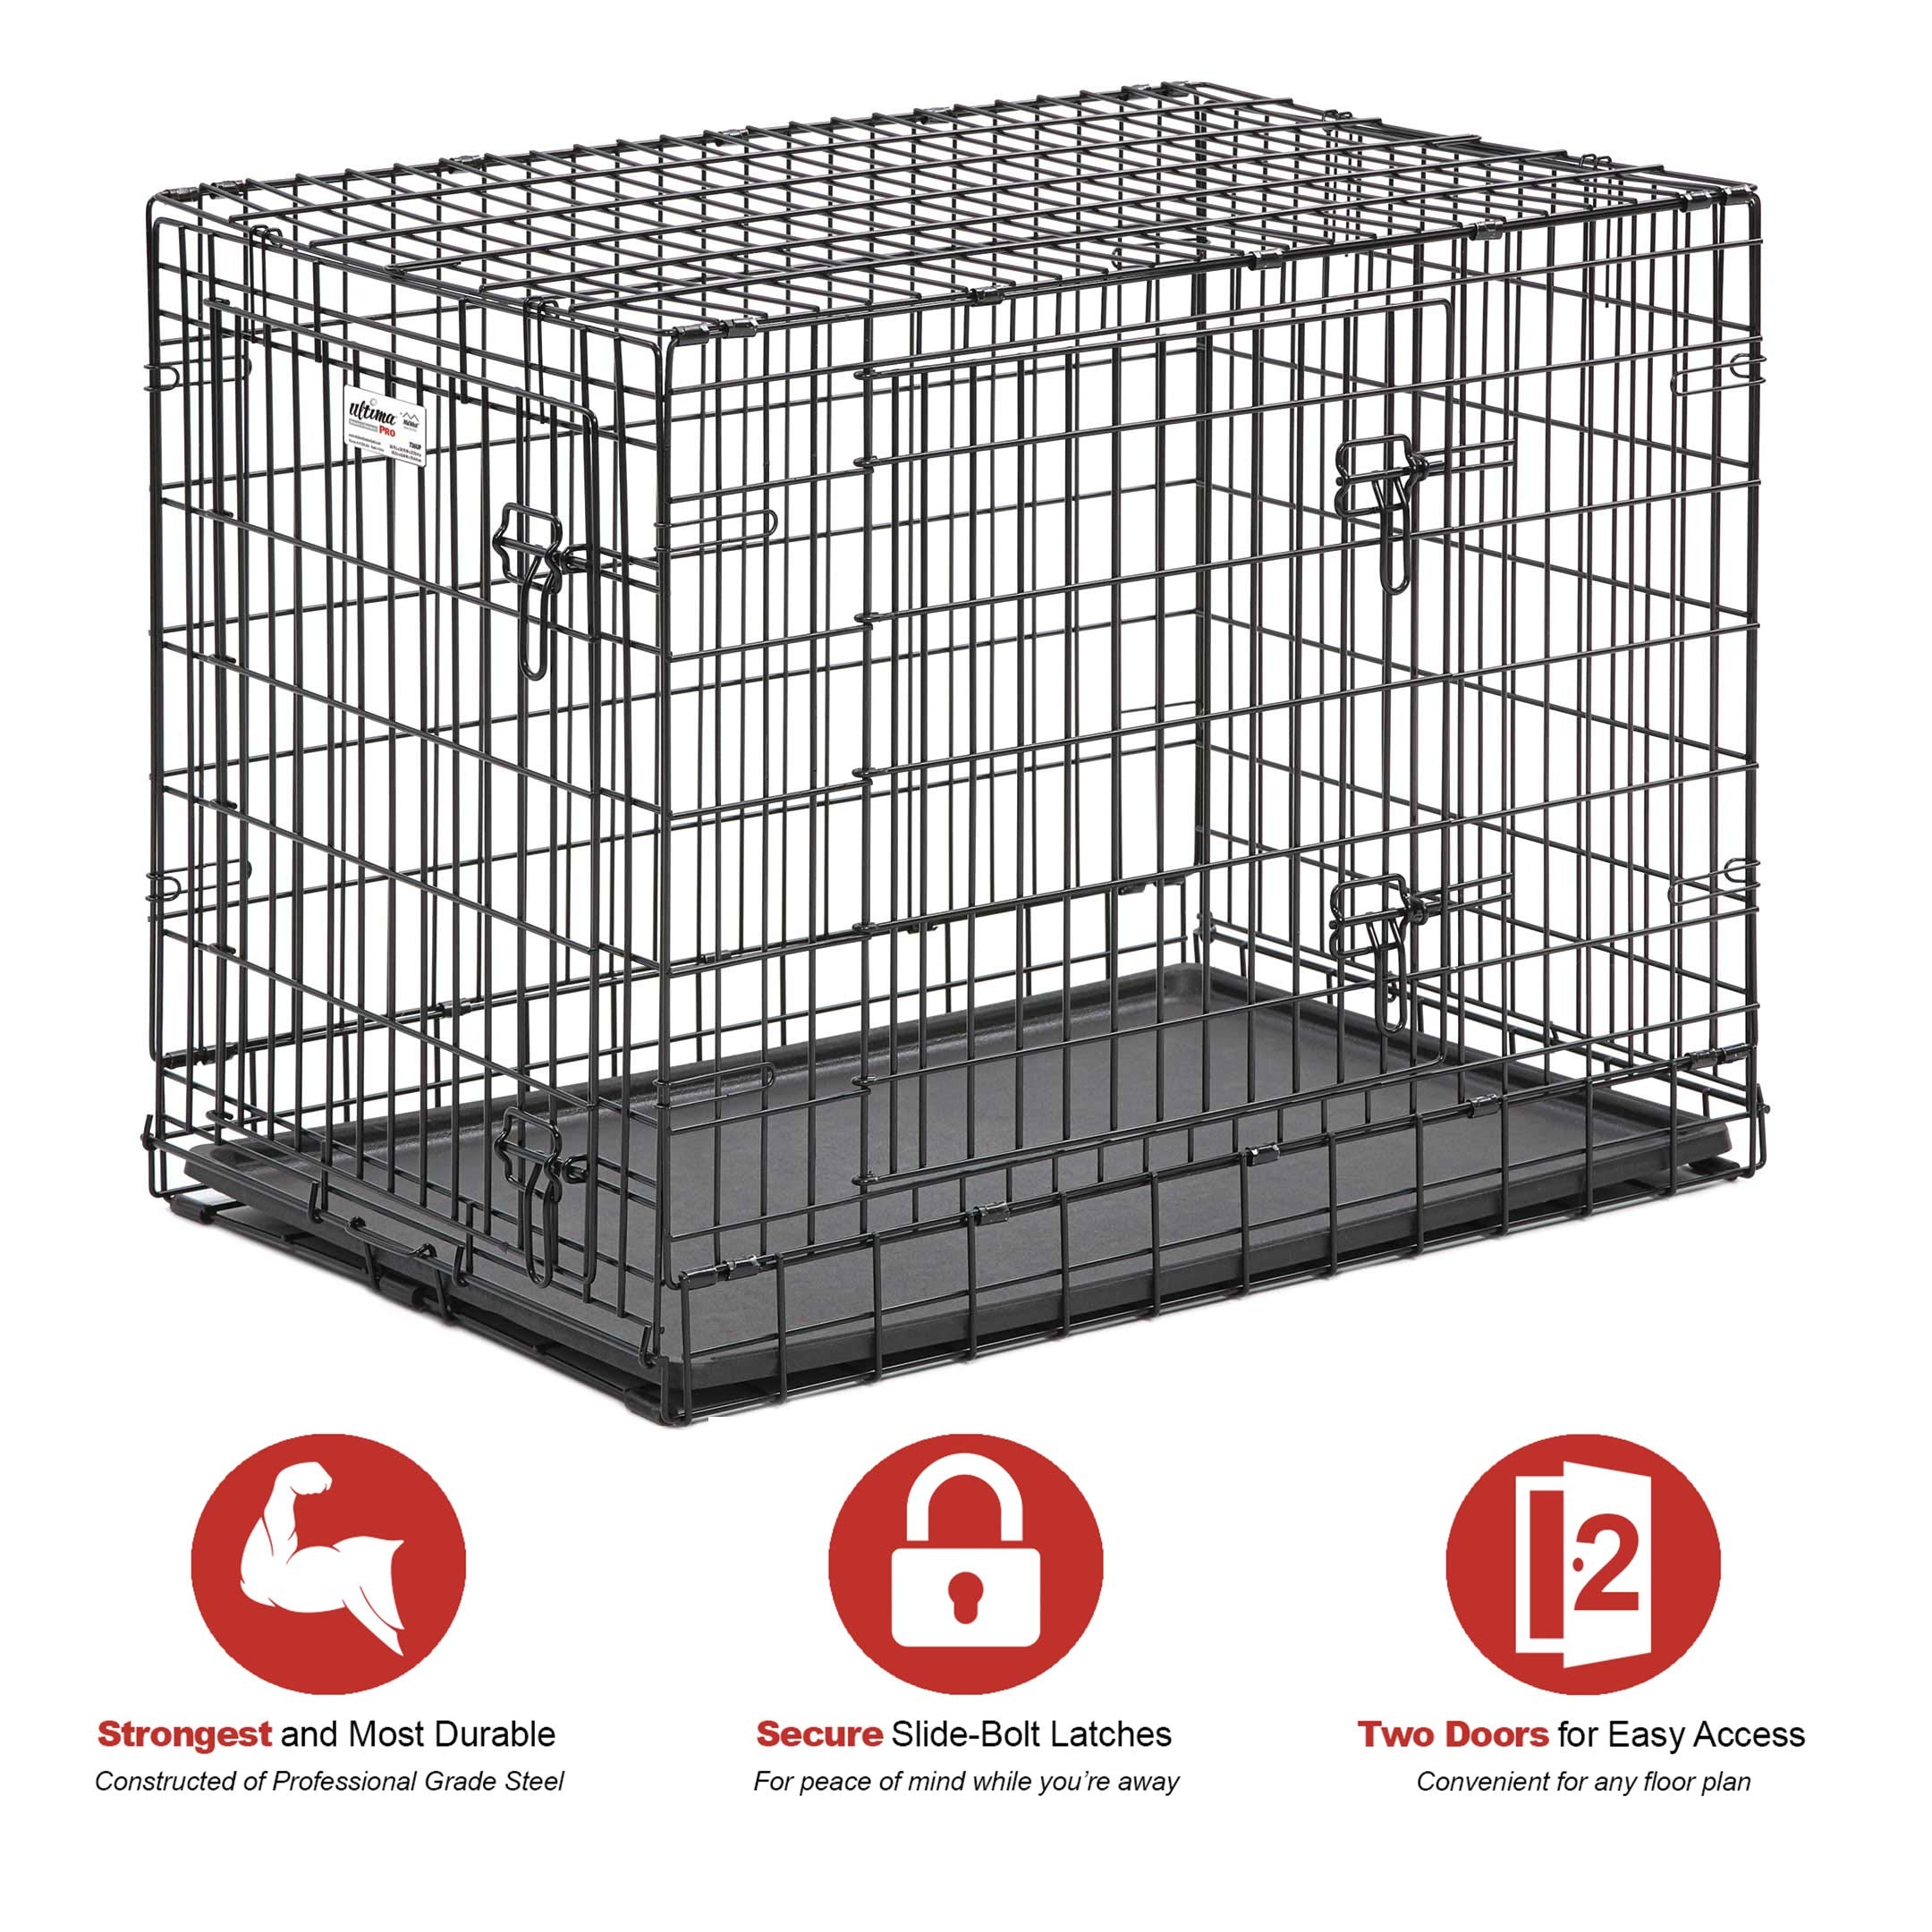 Midwest Lifestages Metal Folding Double Door Dog Crate with Divider - 36